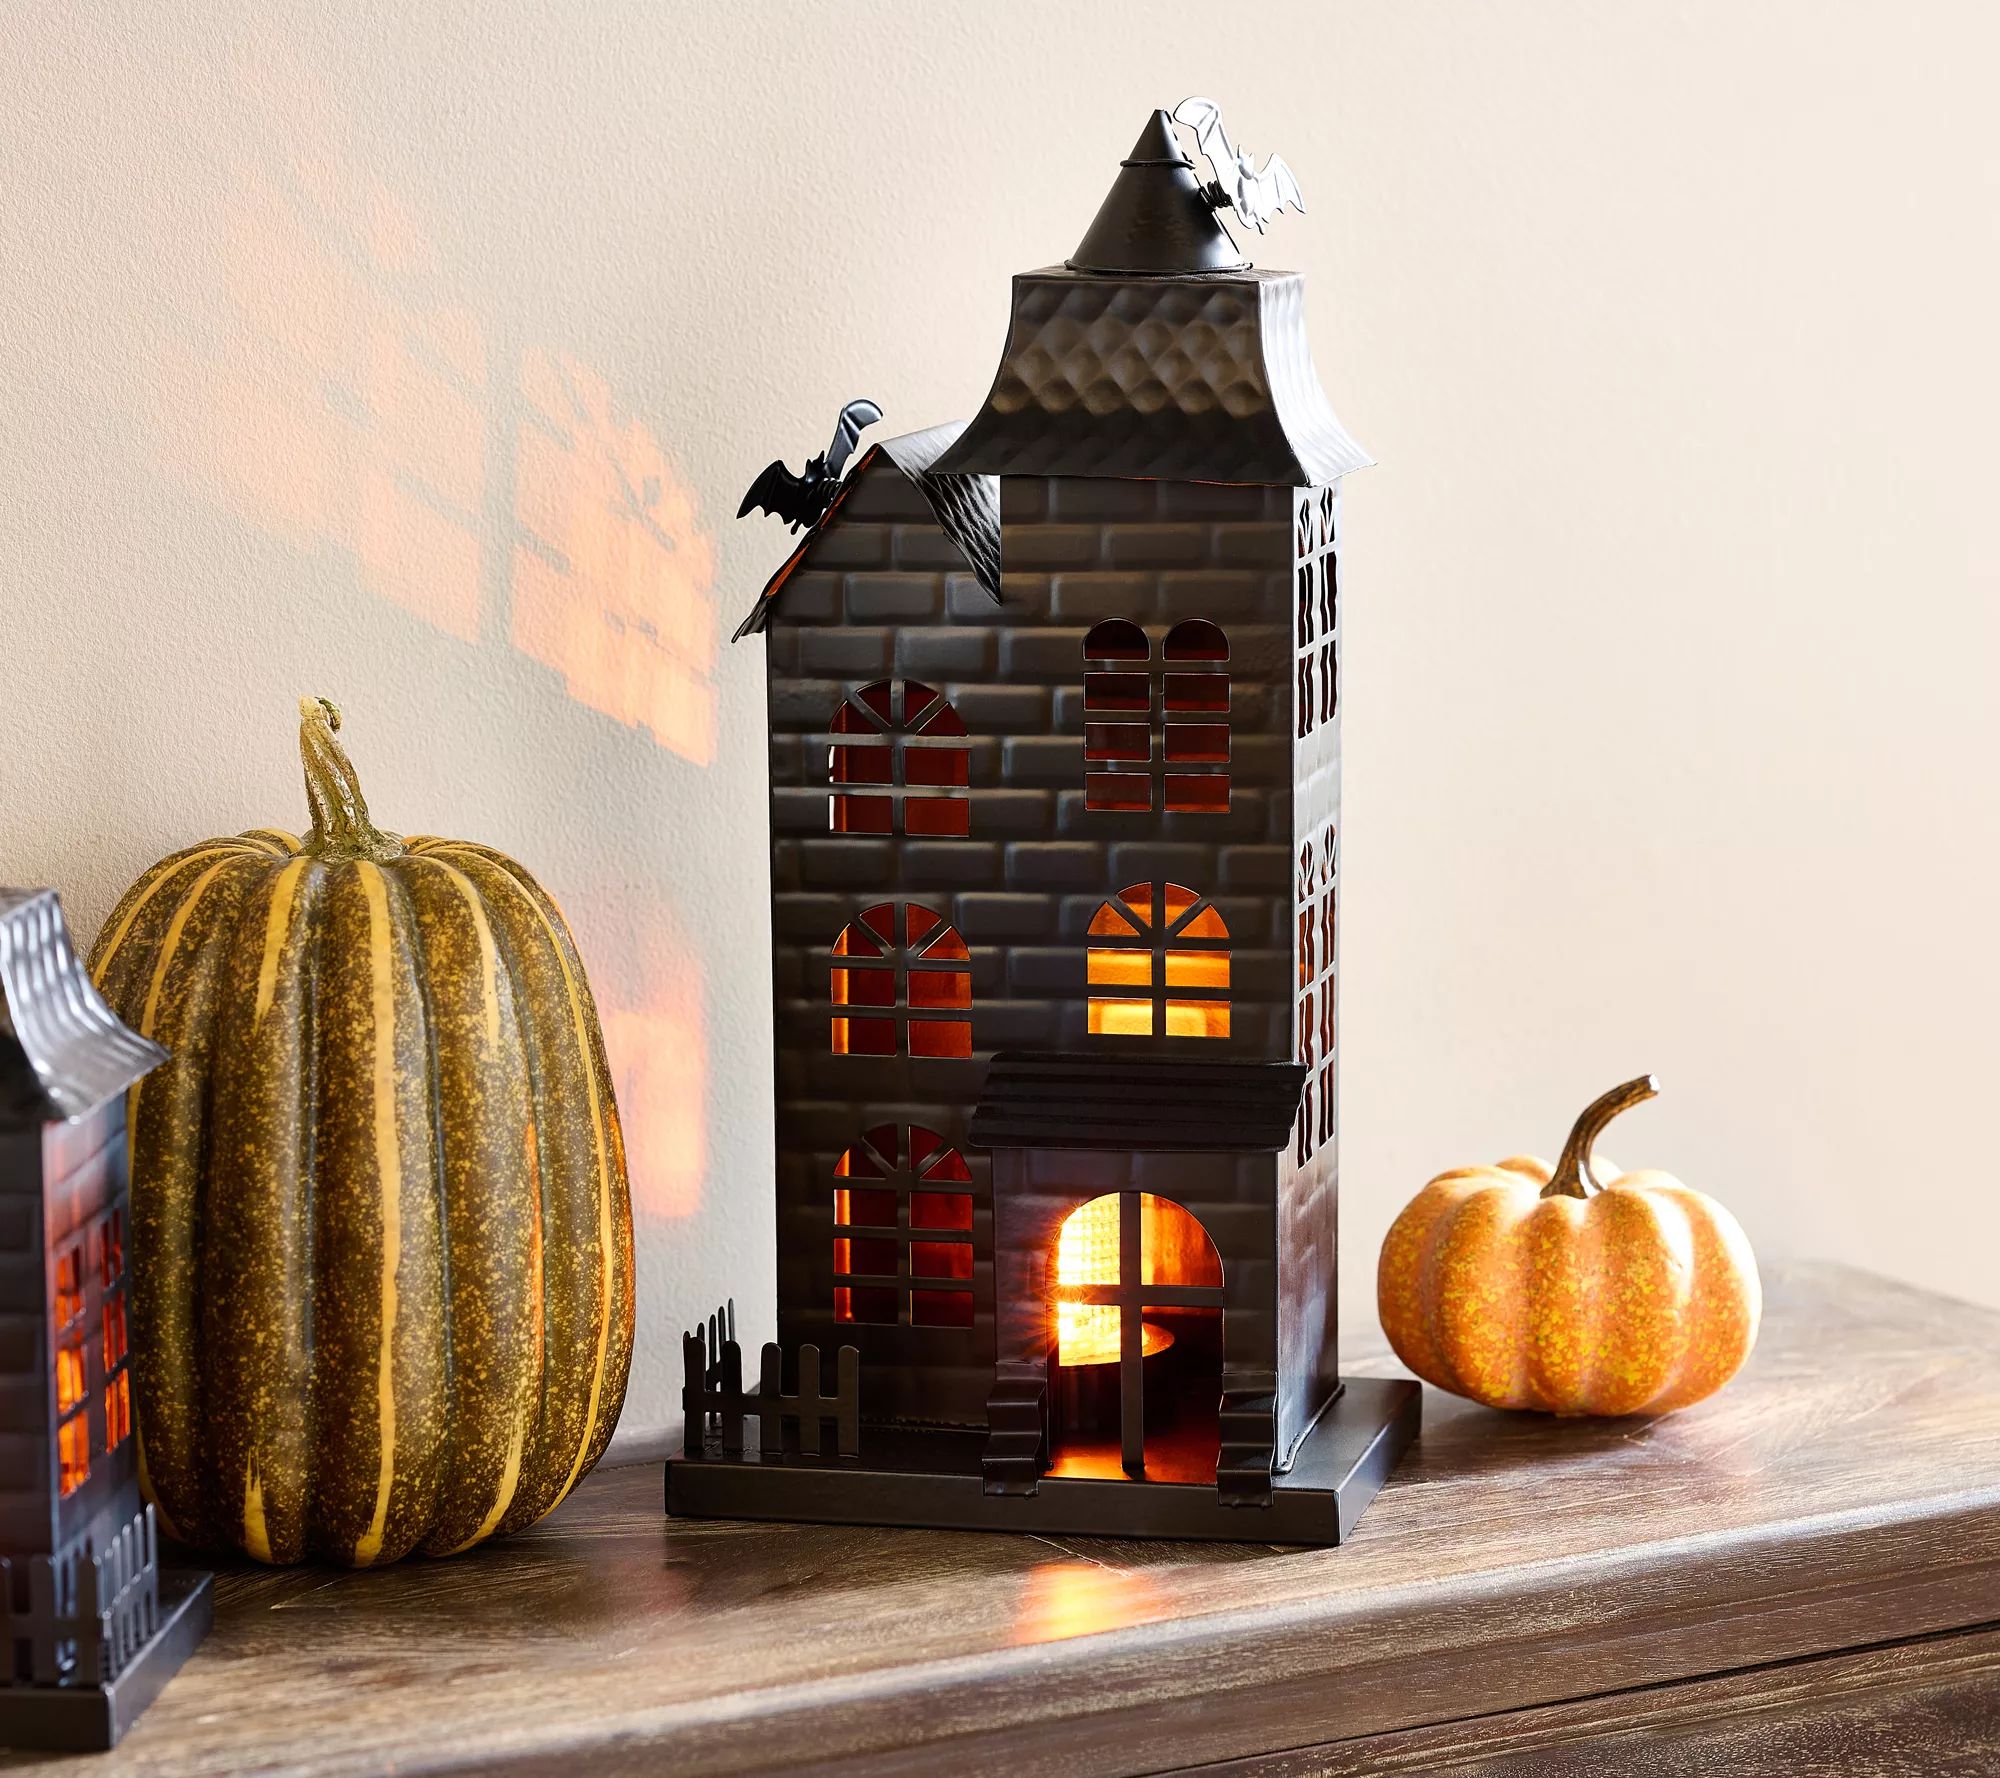 Junk Gypsy by JG 15" Haunted House w/ Flickering LED Light w/ Remote | QVC